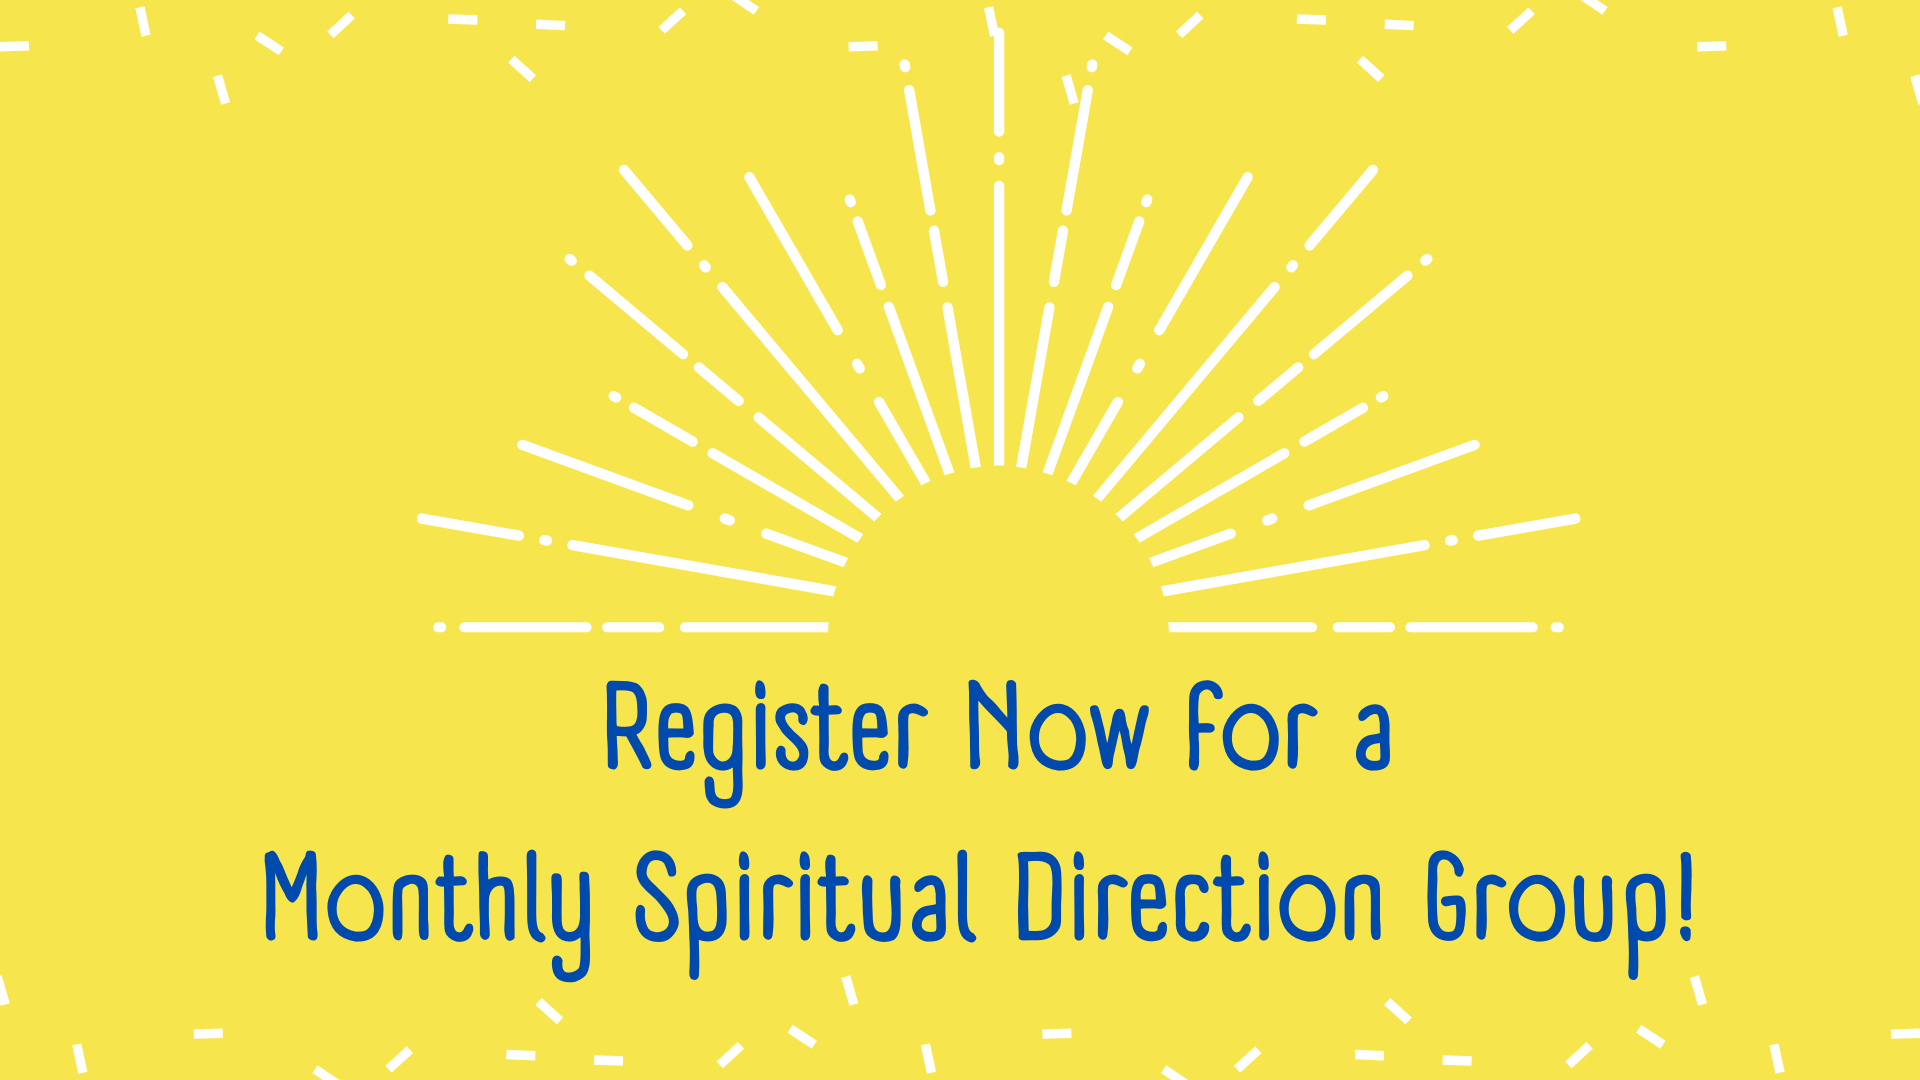 Monthly Spiritual Direction Group Registration is Open!